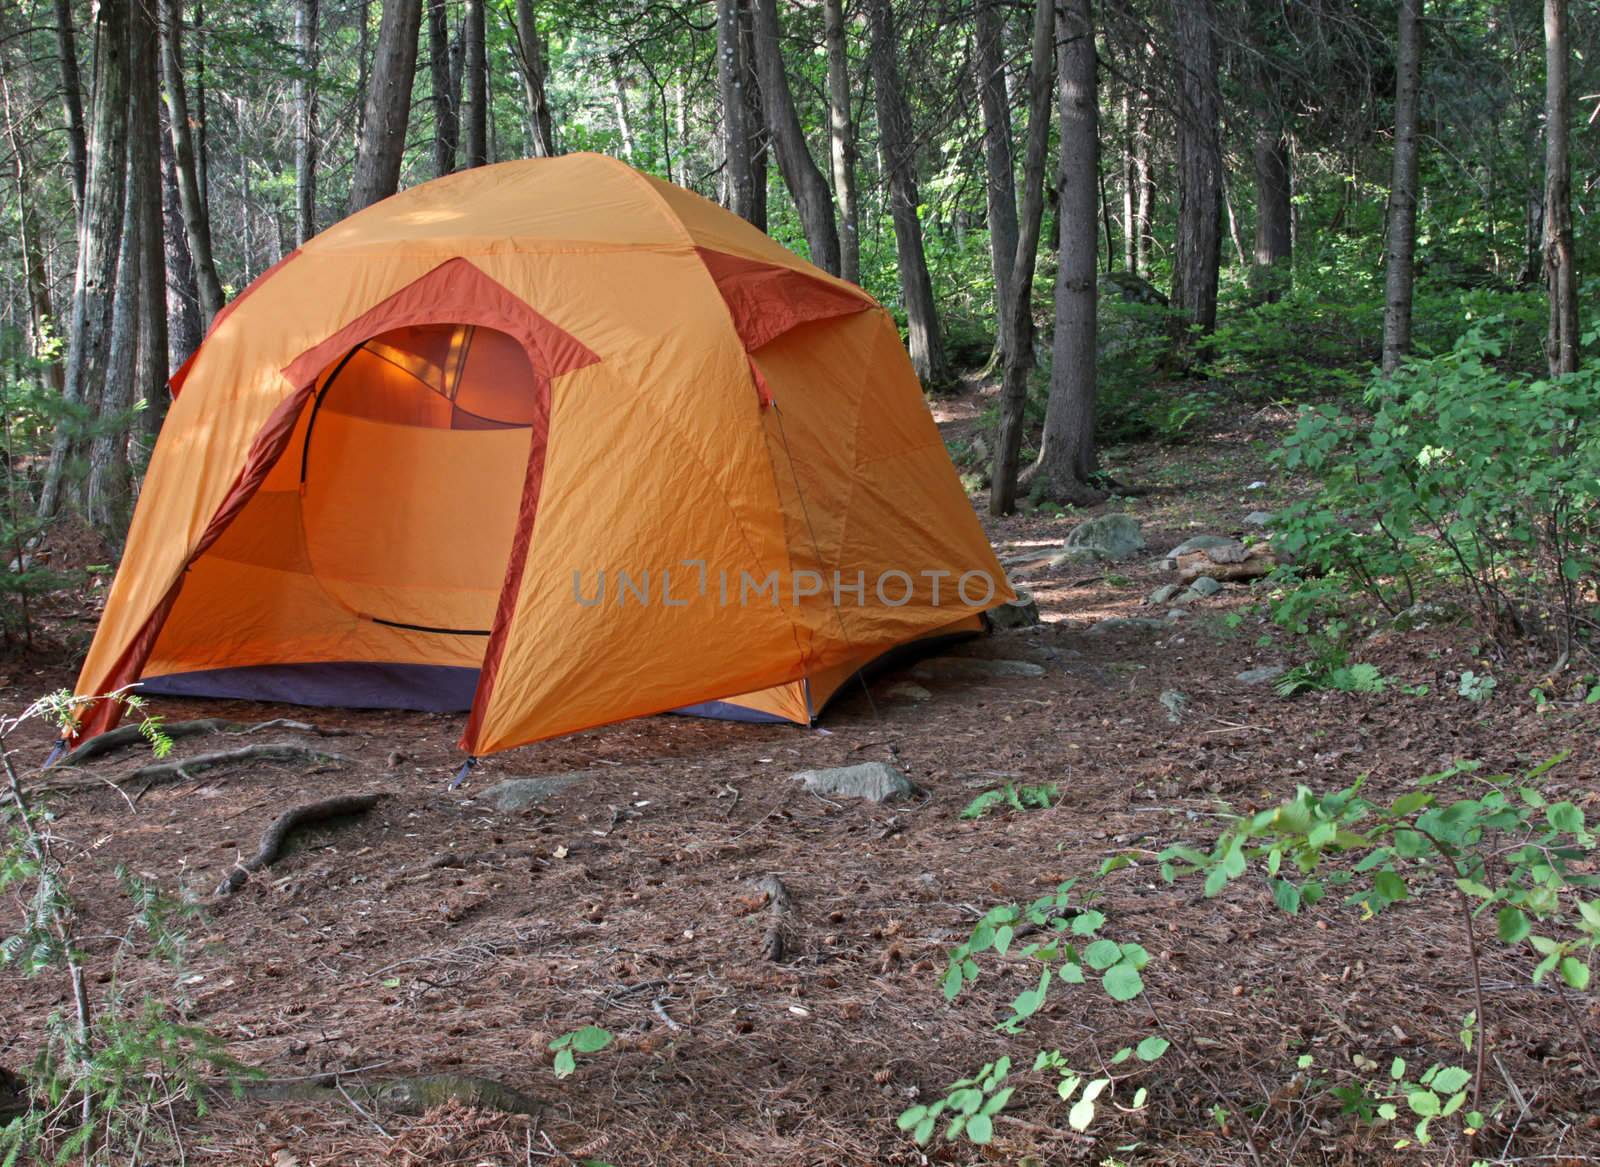 Orange Tent in a Forest by ca2hill